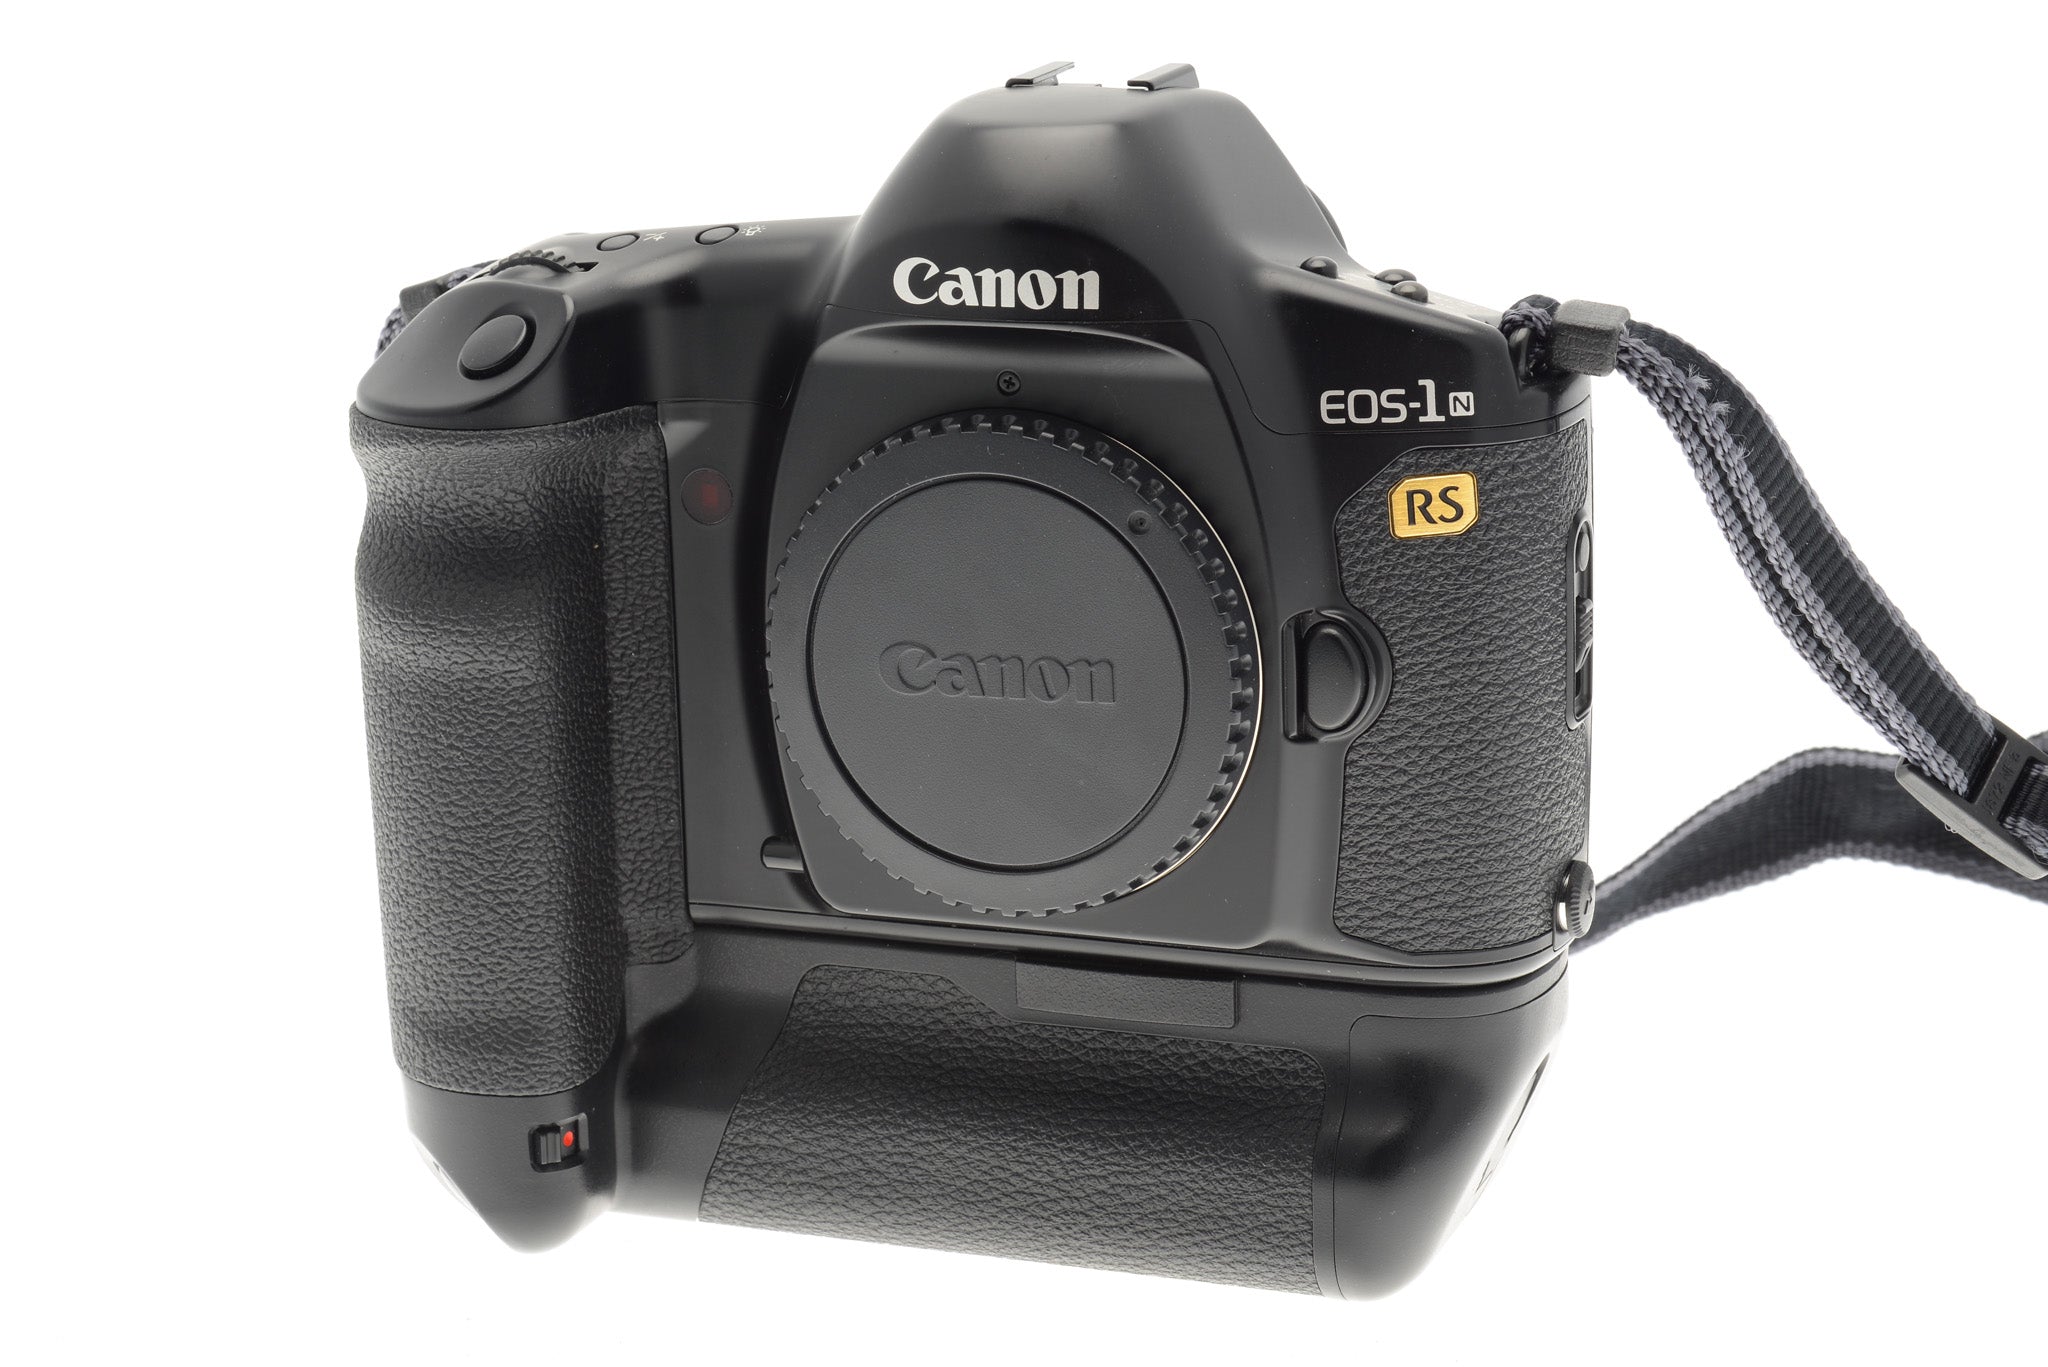 Canon EOS-1N RS - Camera